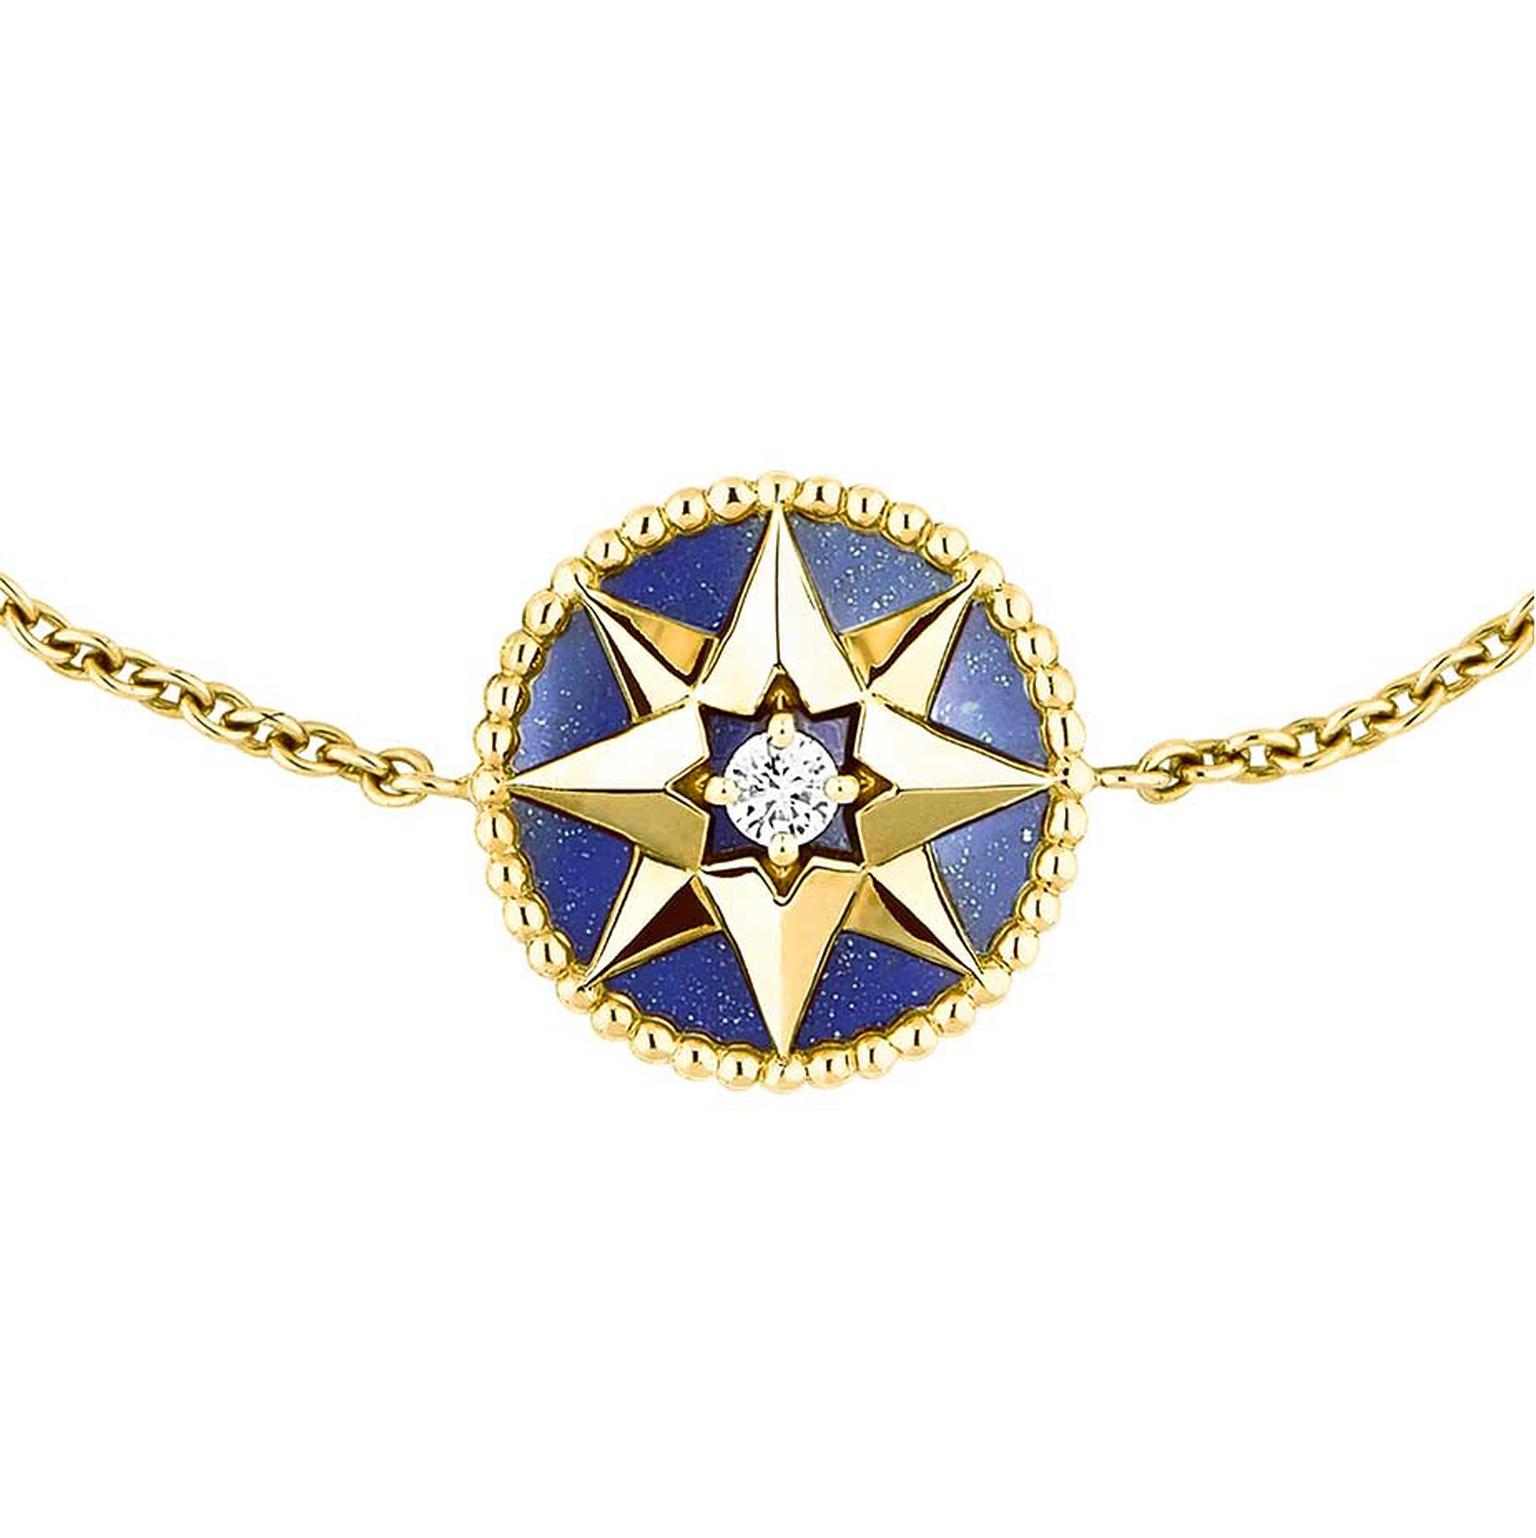 Dior Rose des Vents bracelet in yellow gold and lapis lazuli, set with a central round brilliant diamond.